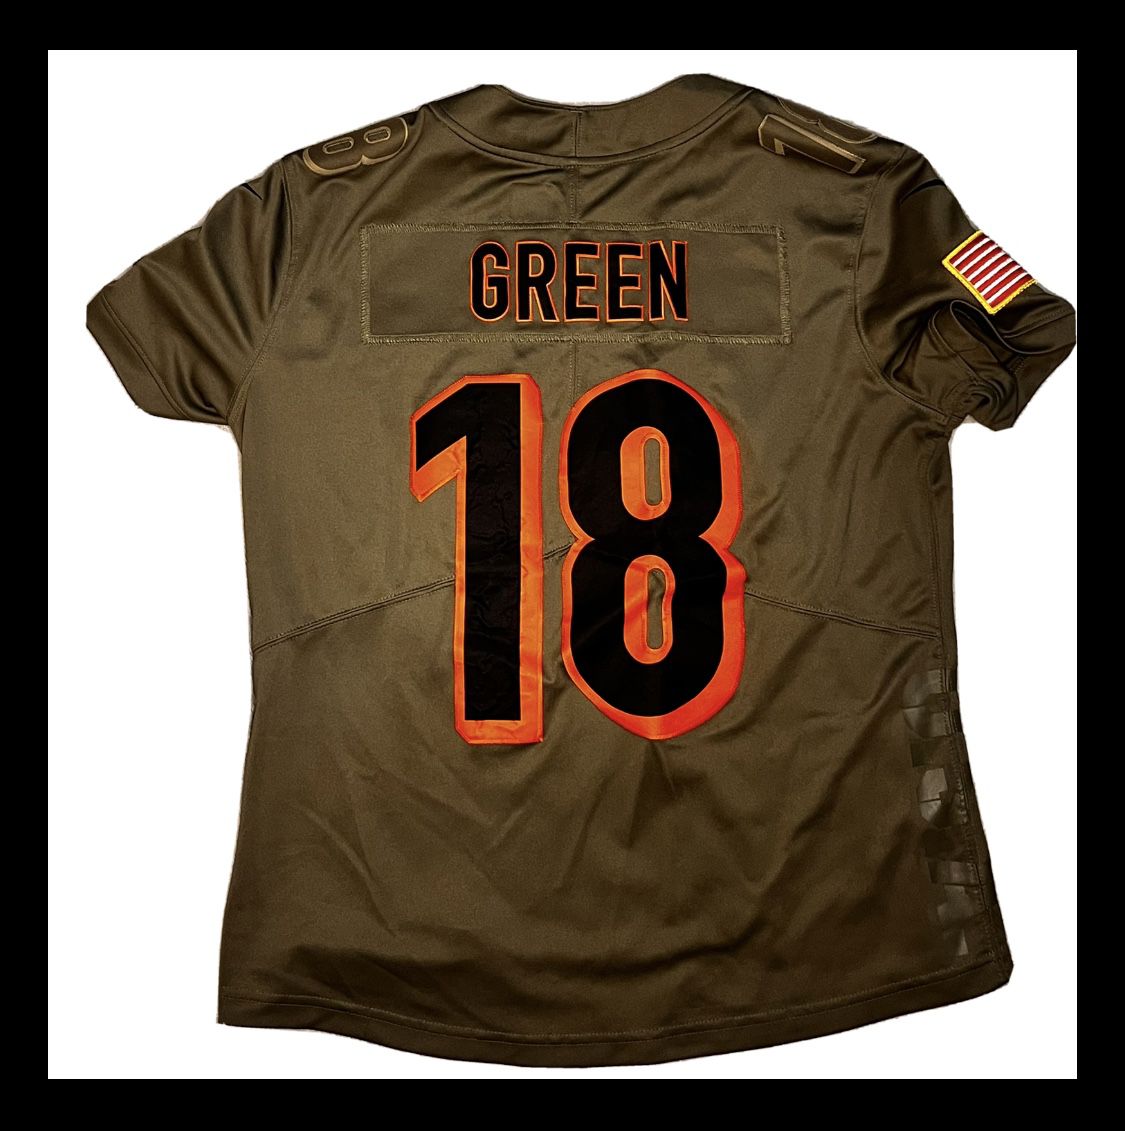 AJ Green NFL Green Limited Edition Jersey Size M Bengals